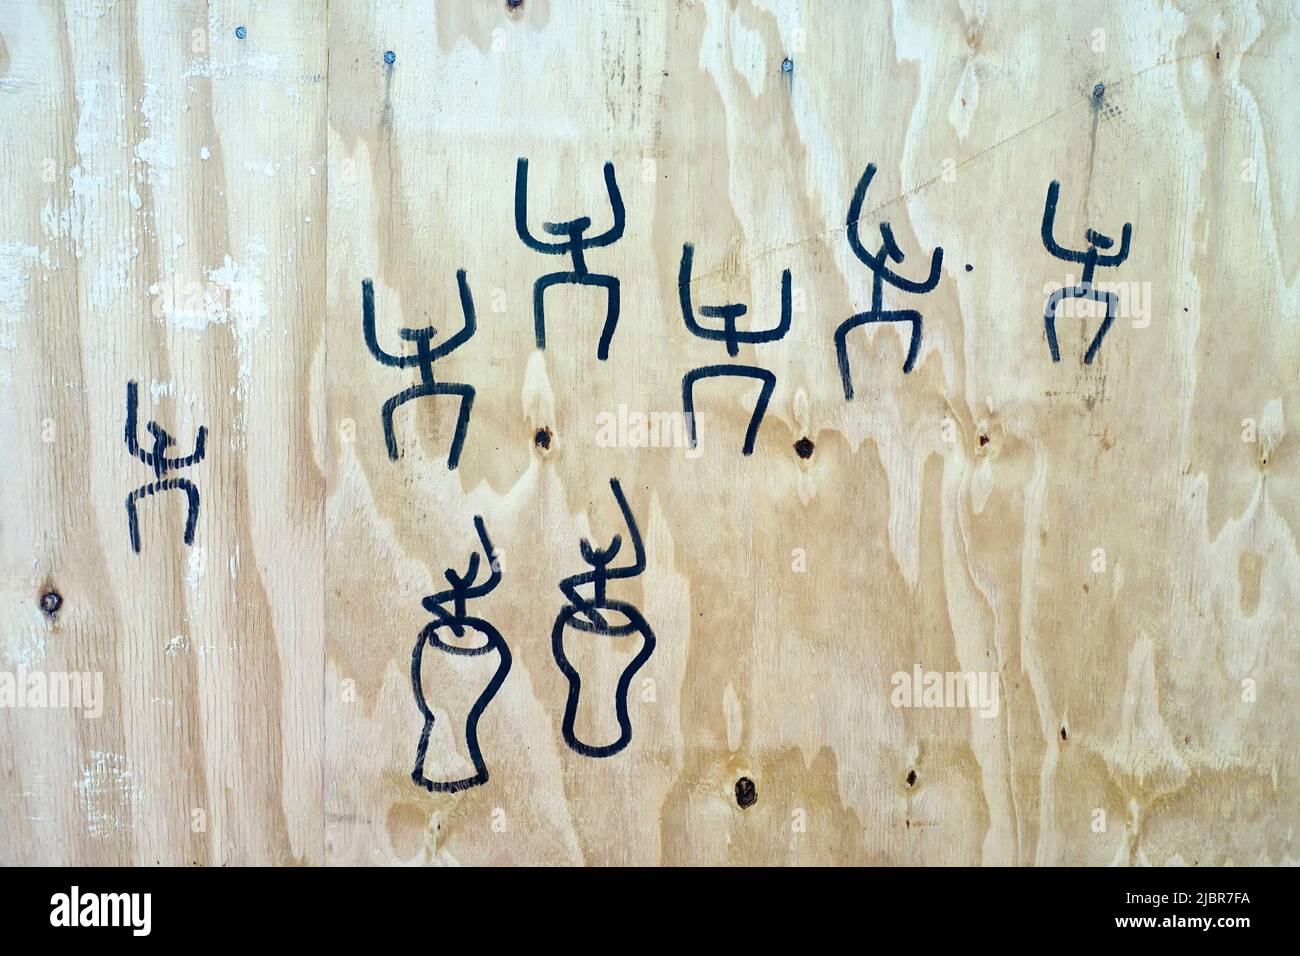 Drawn funny figures on a site fence Stock Photo